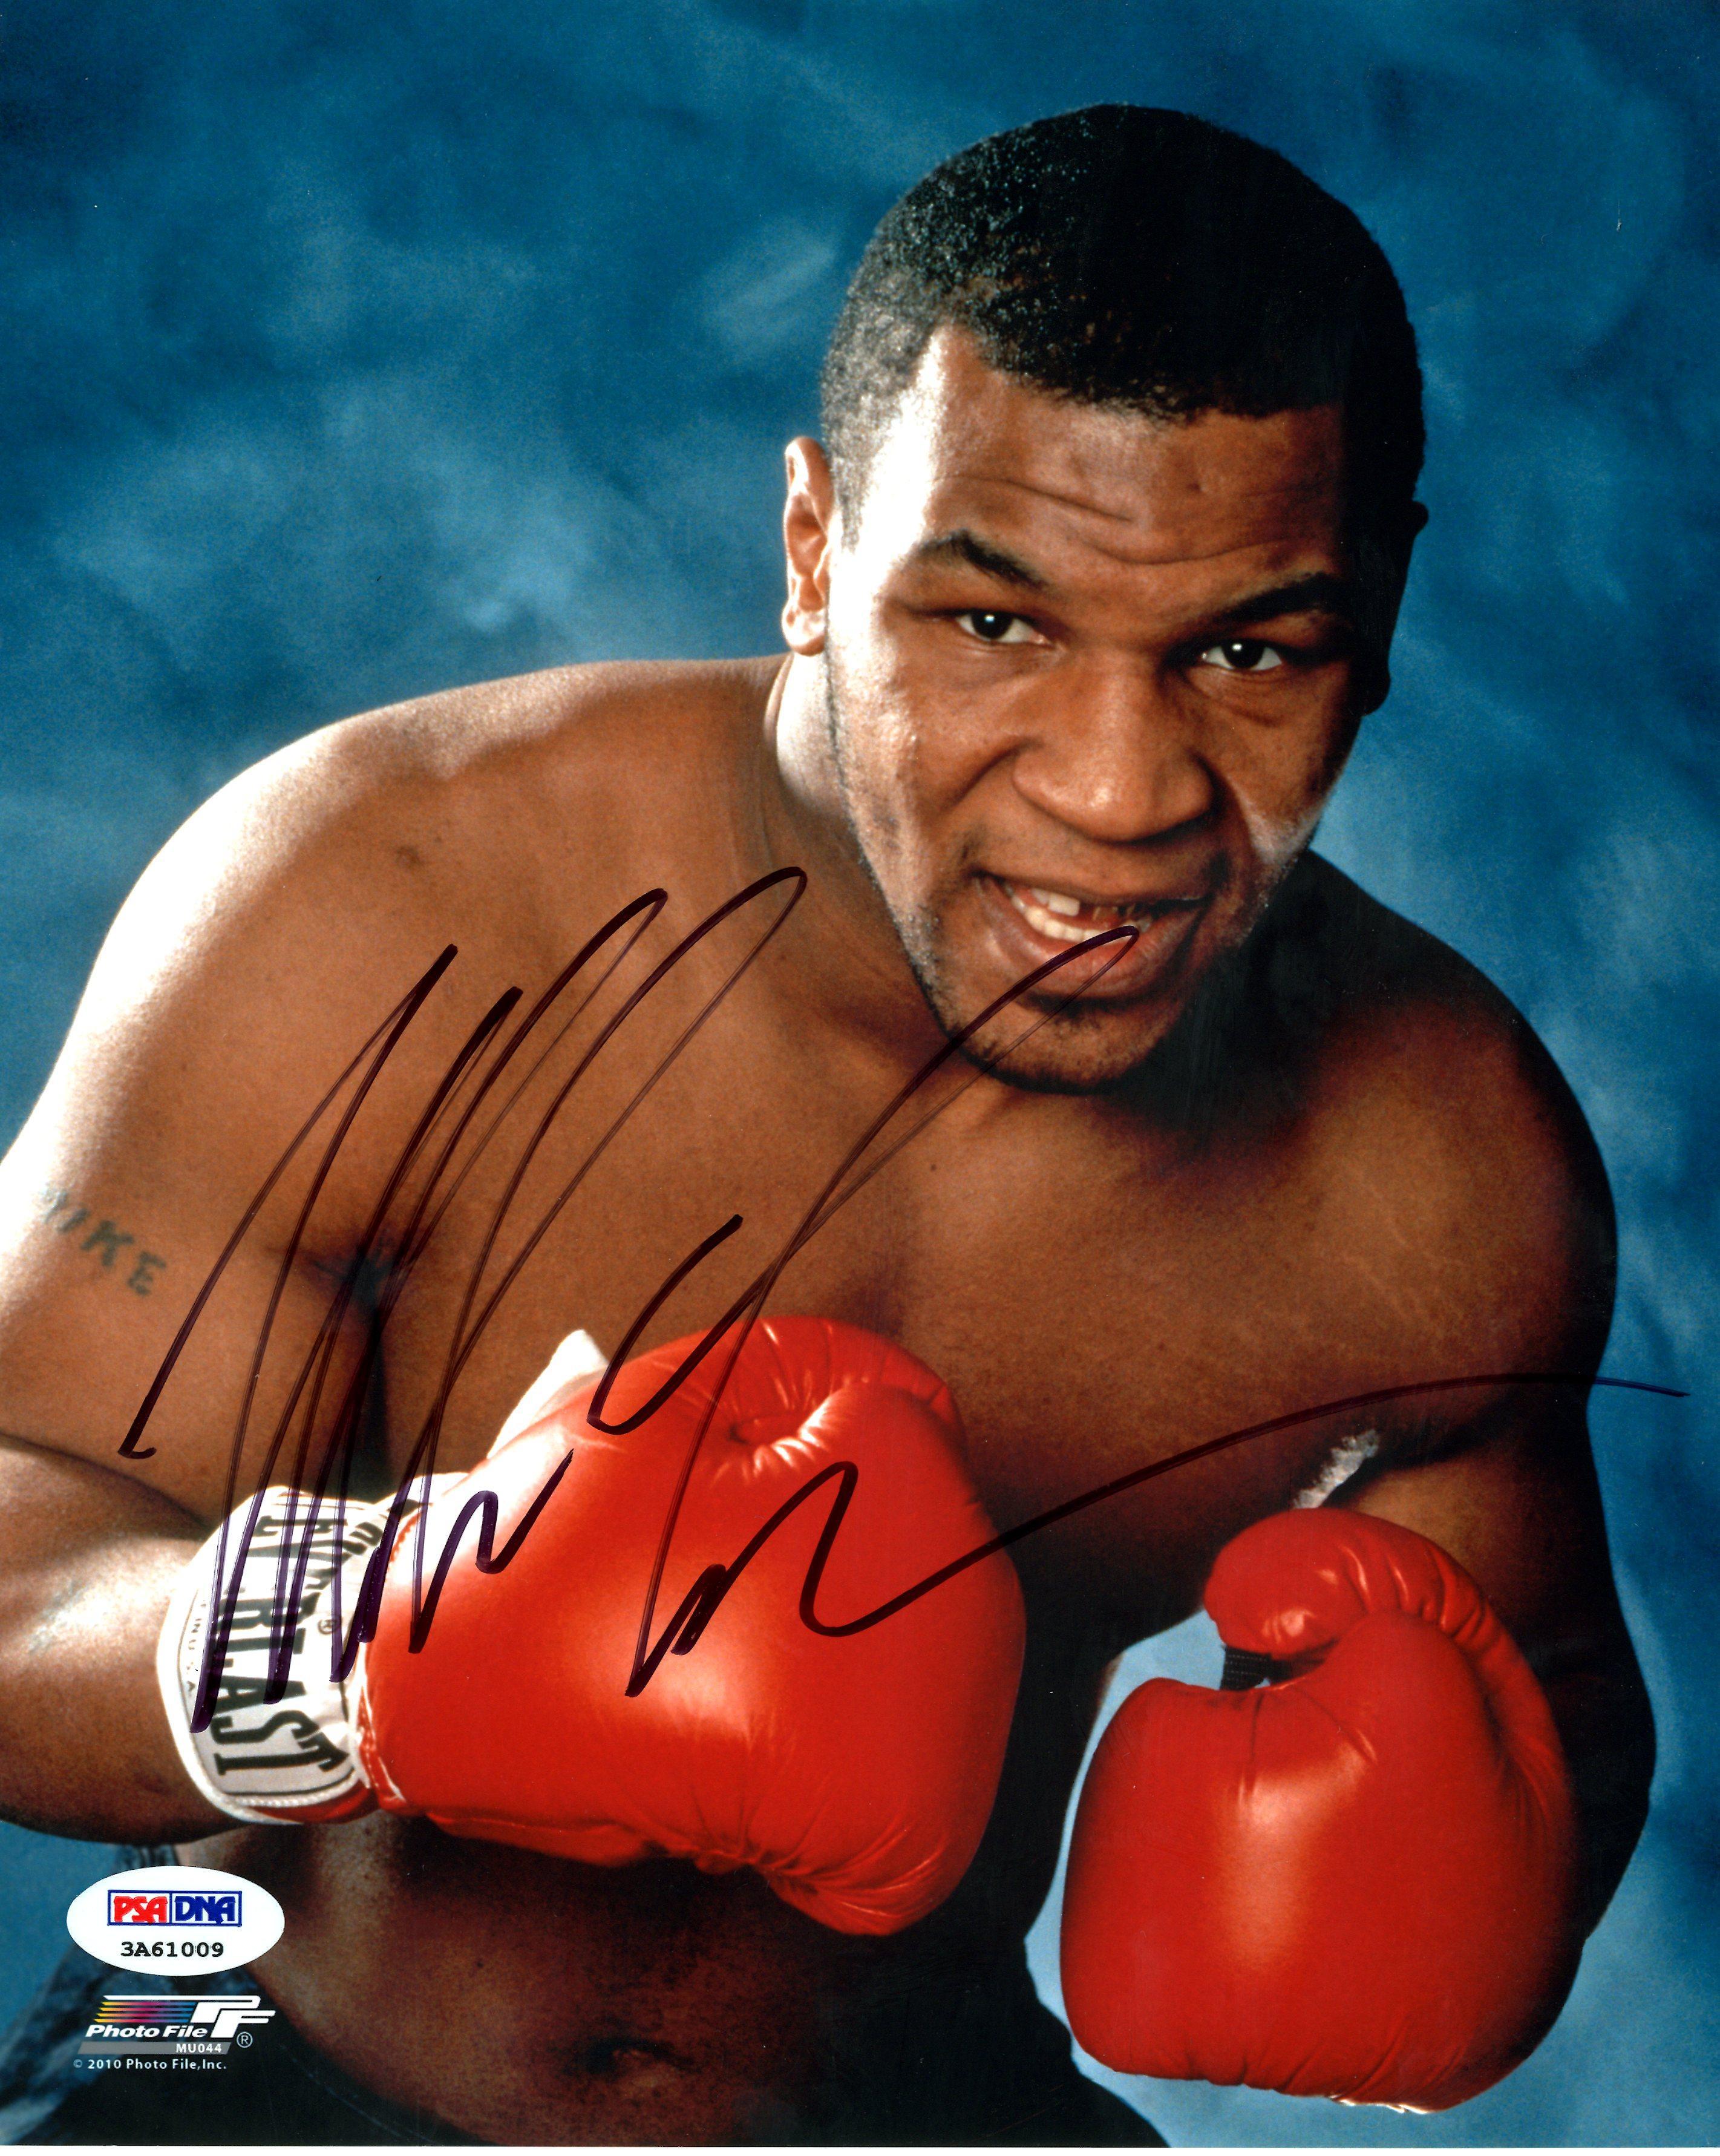 LIVE Mike Tyson Wallpaper 16 Free Download